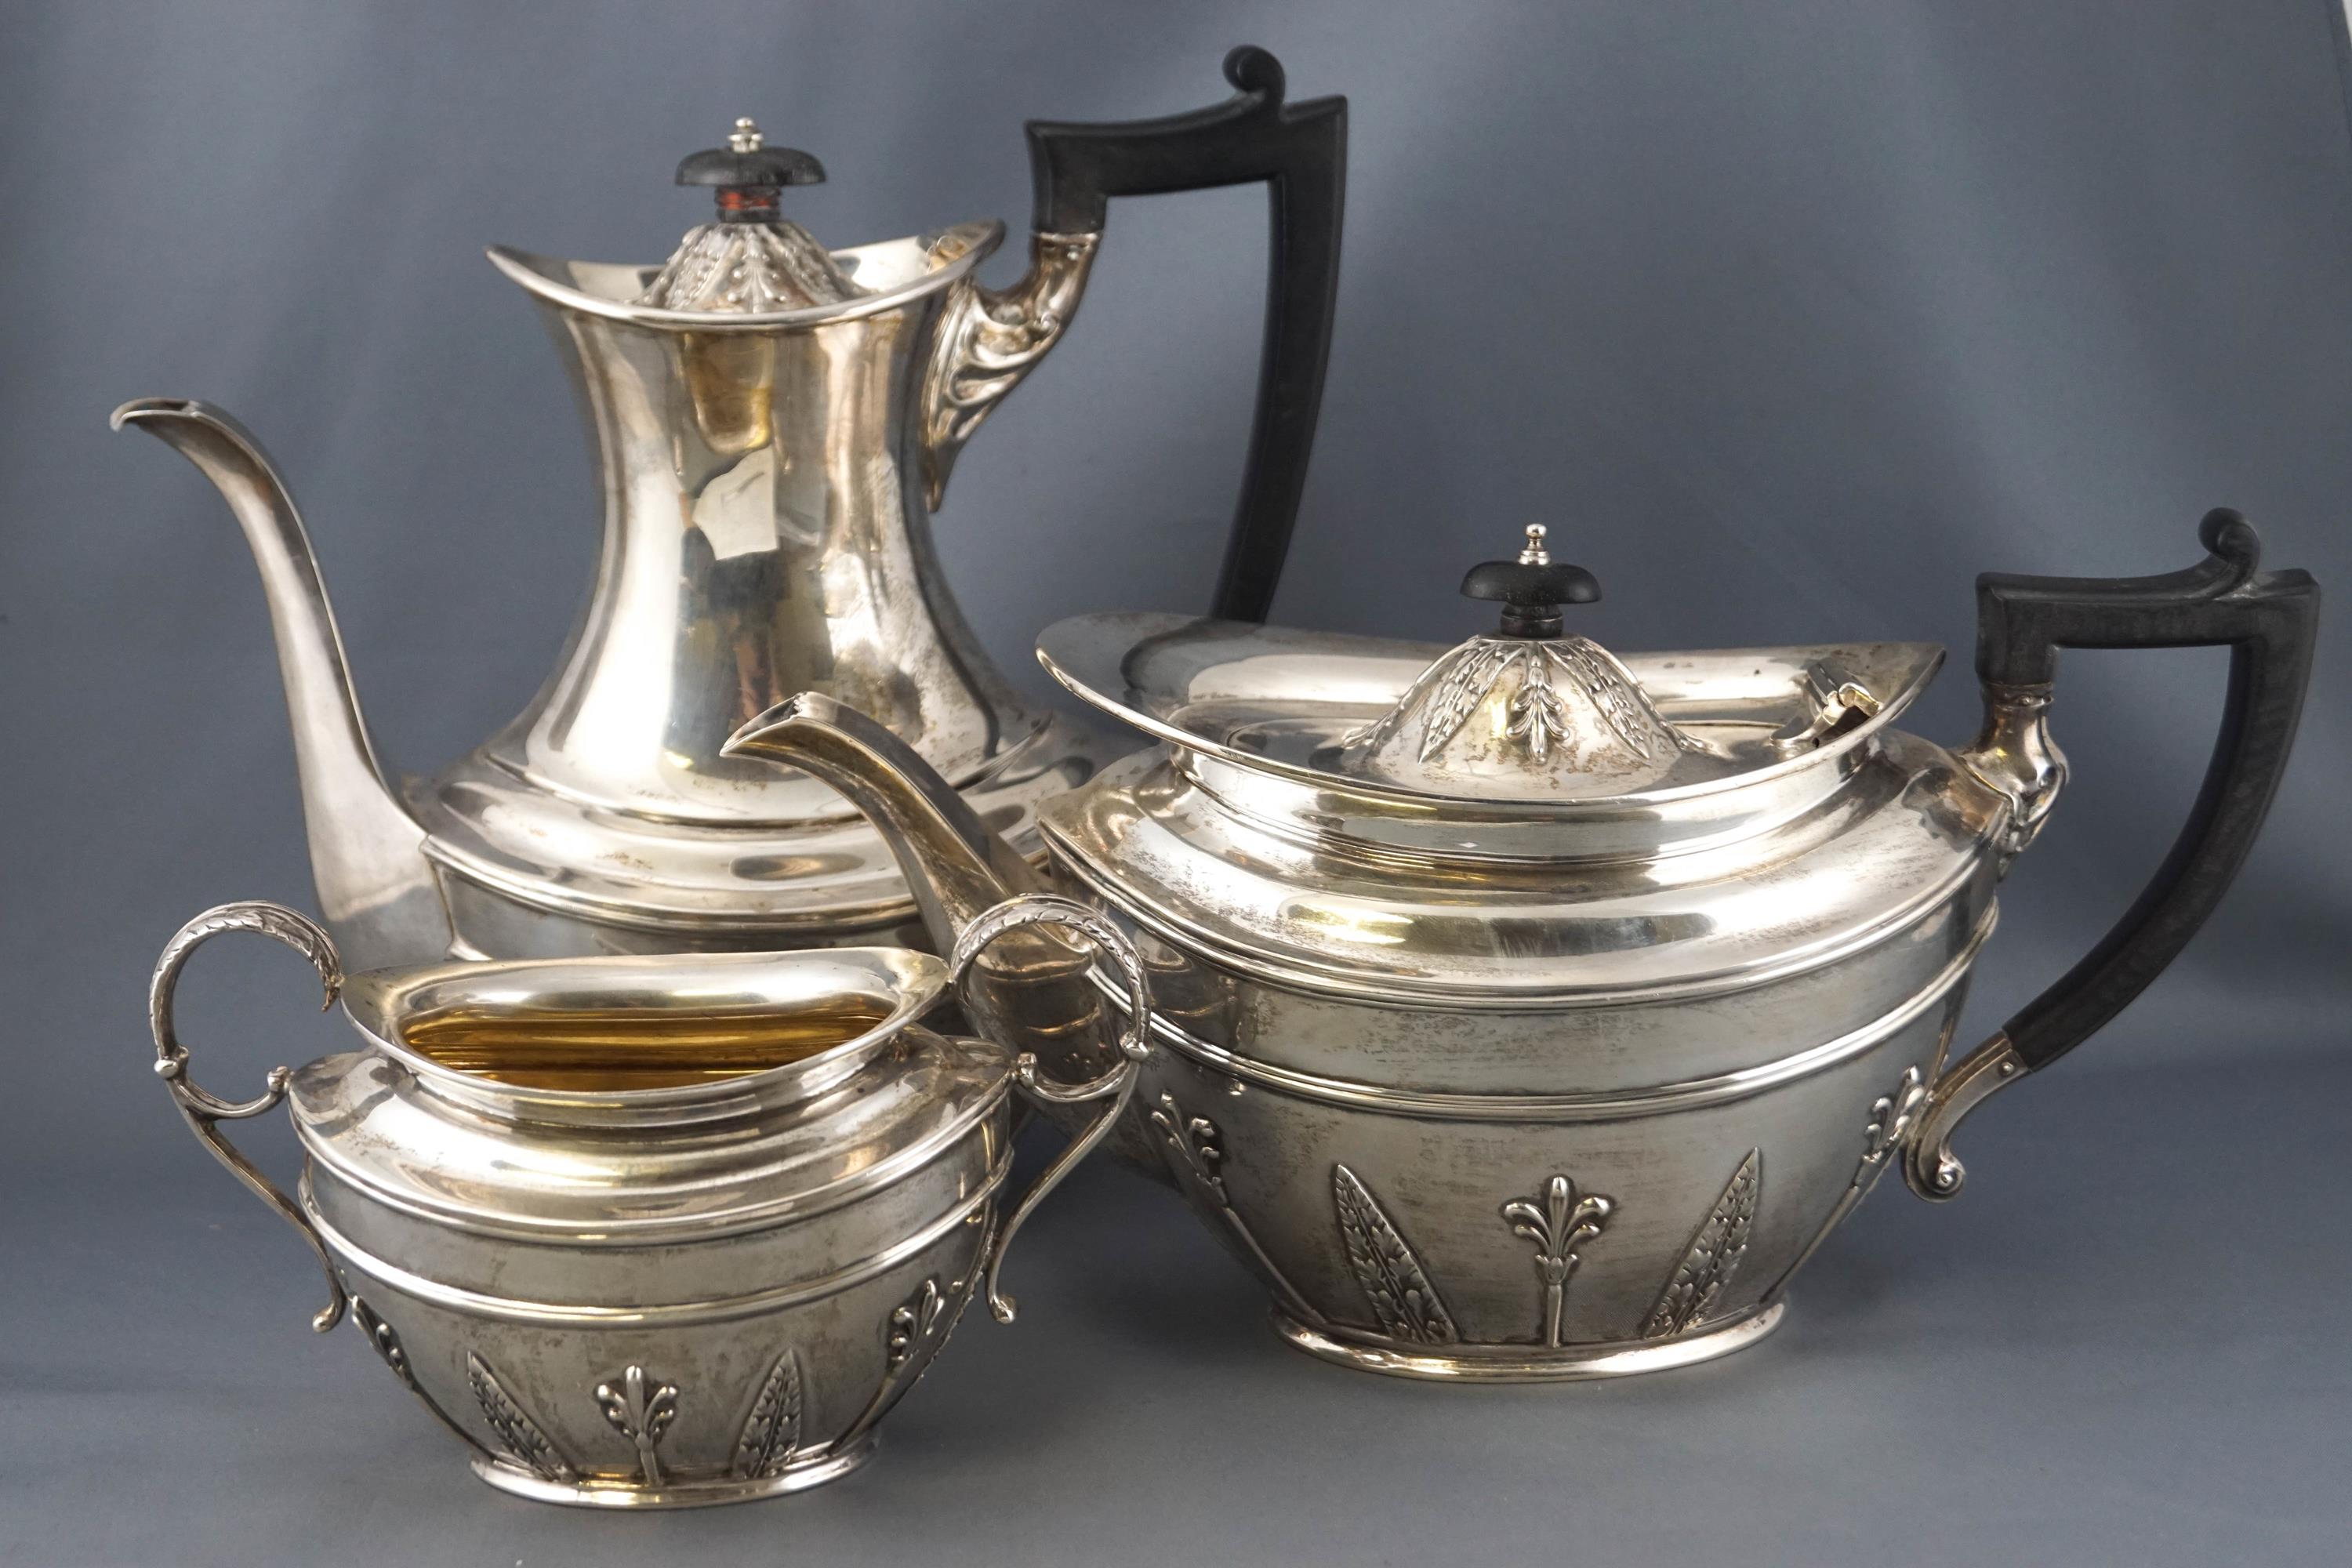 A silver French style four piece tea and coffee service, of oval form, with domed covers,